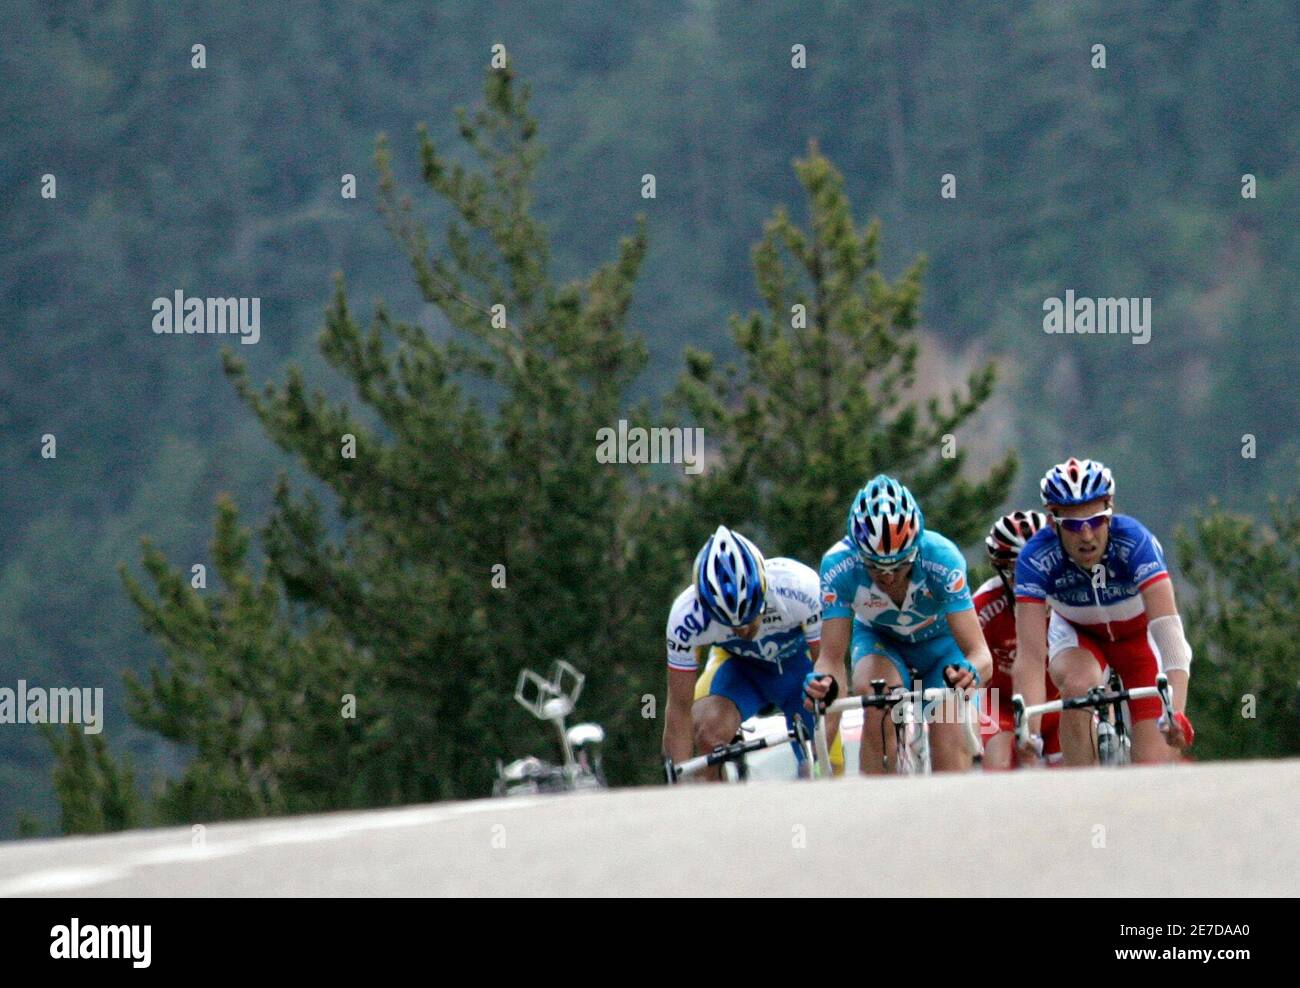 France's Cyril Dessel, of the AG2R-La Mondiale team (L) rides near Team Milram's Dominik Roels of Germany and Agritubel's Cristophe Moreu (R) of France during the third stage of the Tour of Catalonia cycling race from Banyoles to La Seu D'urgell, May 21, 2008.   REUTERS/Gustau Nacarino  (SPAIN) Stock Photo